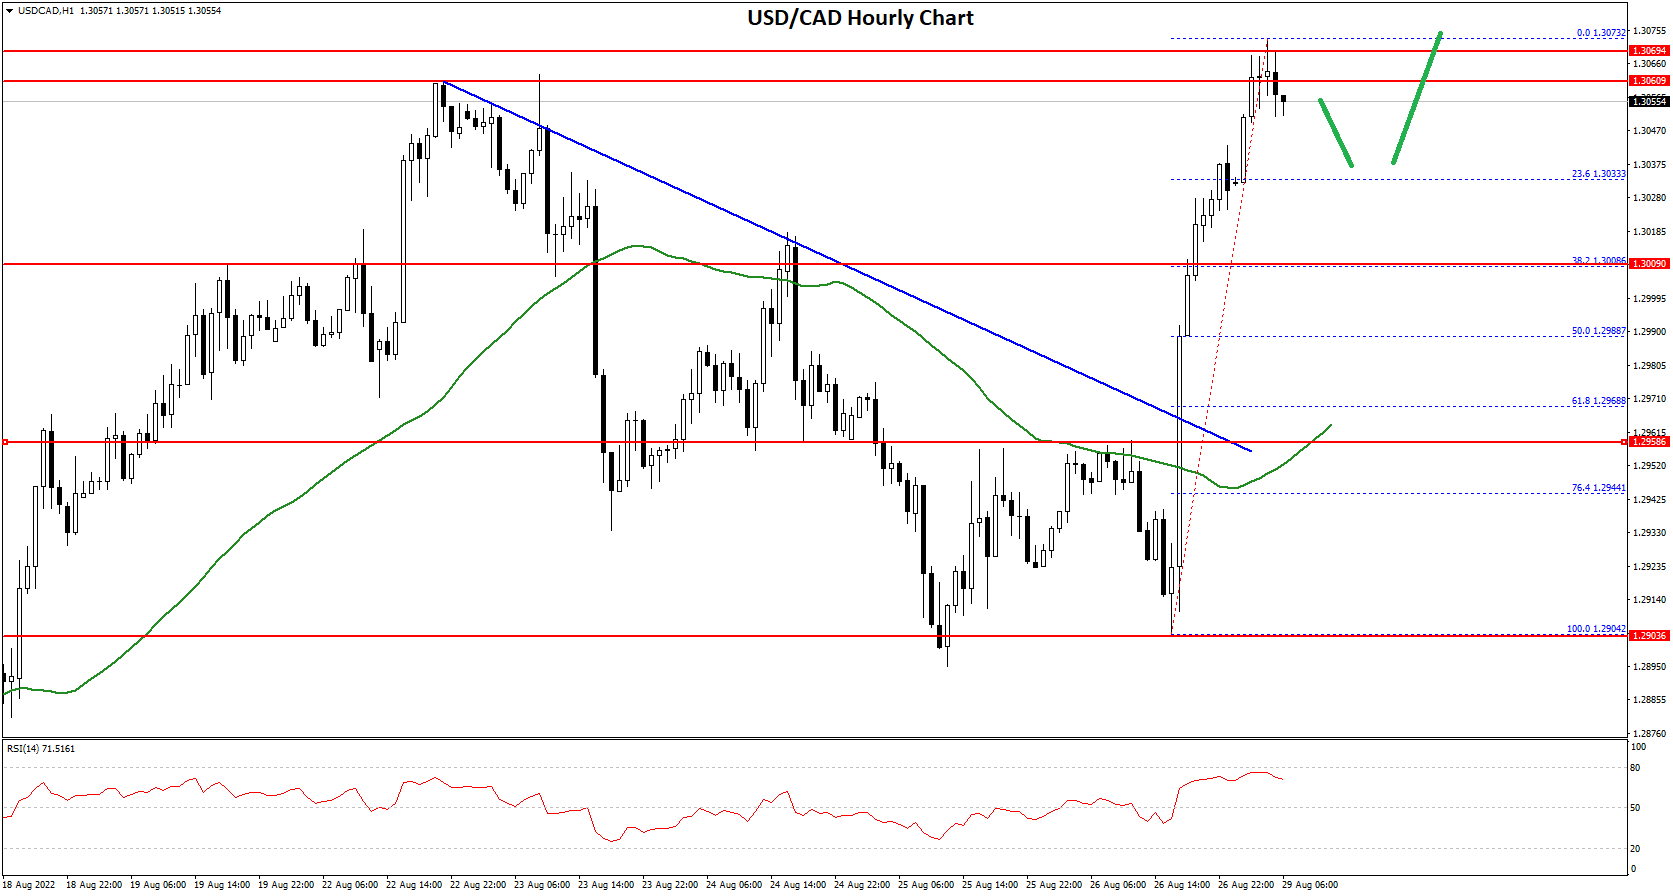 GBP/USD Nosedives While USD/CAD Gains Strength